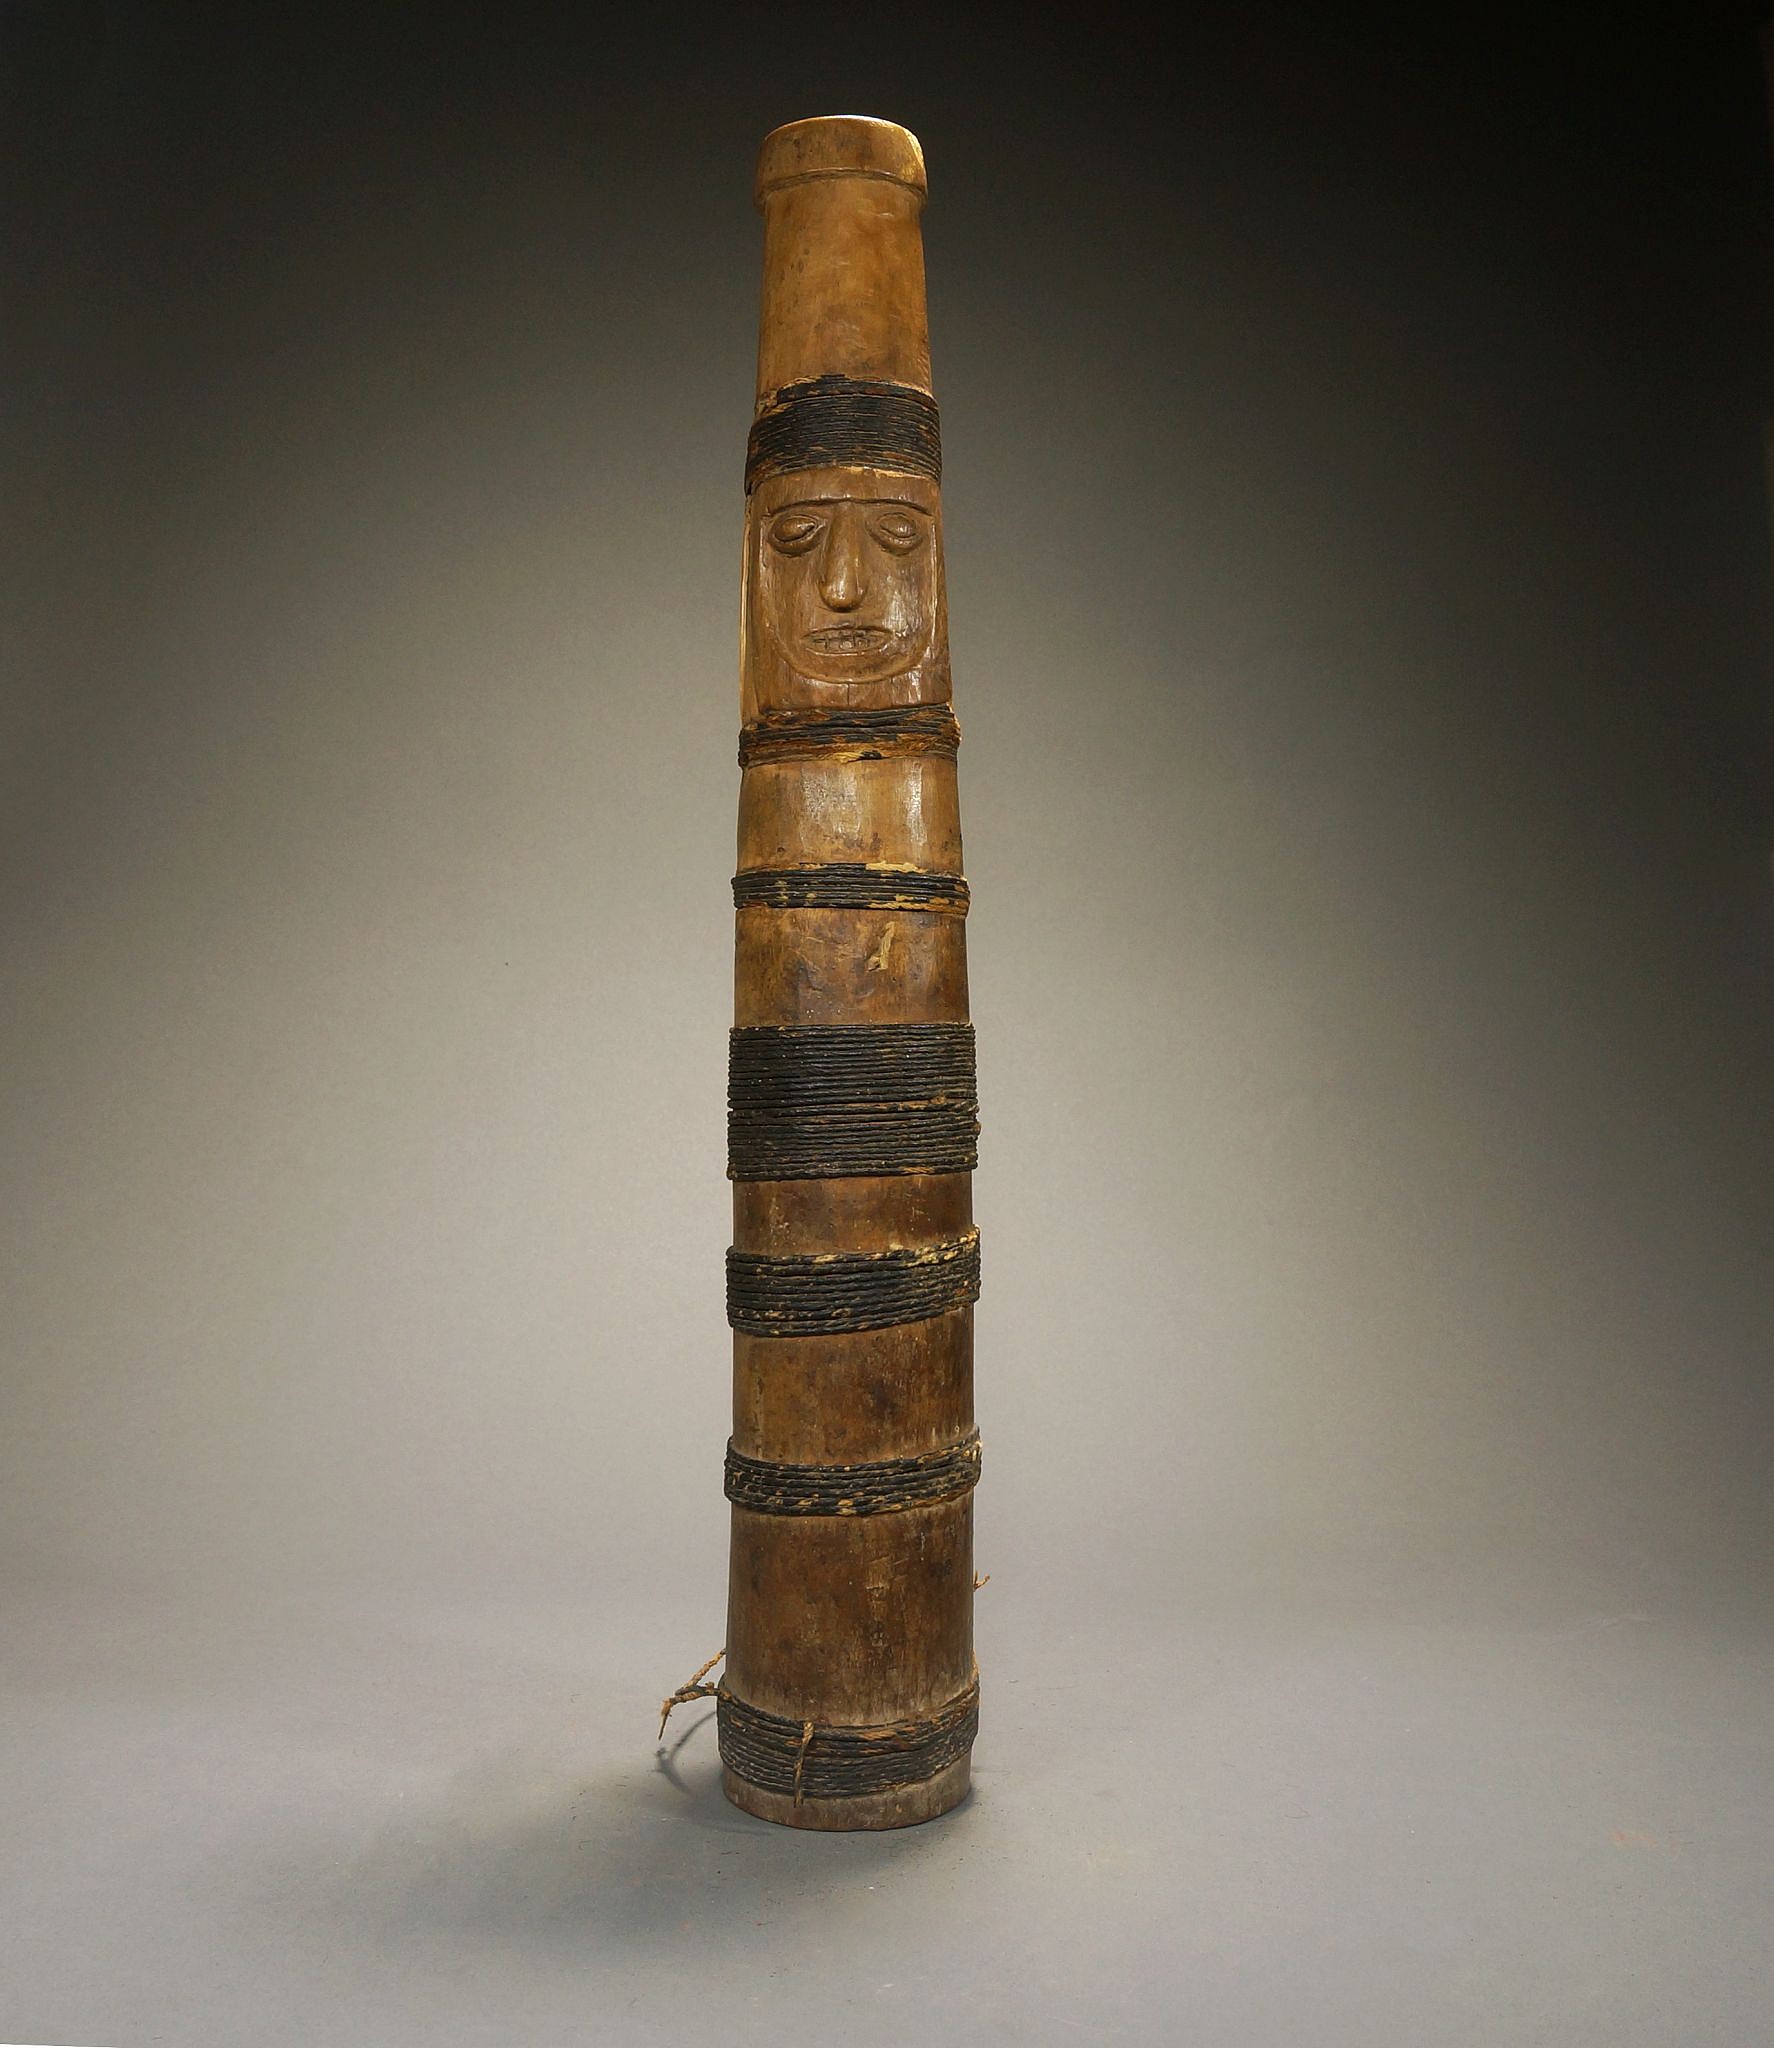 Peru, South Coast Wari Carved Wooden Trumpet with Face
This Wari trumpet has been wrapped in bands with a tar covered cotton rope. It has the typical trumpet pitch.  This is a rare object to find so intact.
Media: Wood
Dimensions: Length: 16.5 Inches
$7,500
n3018